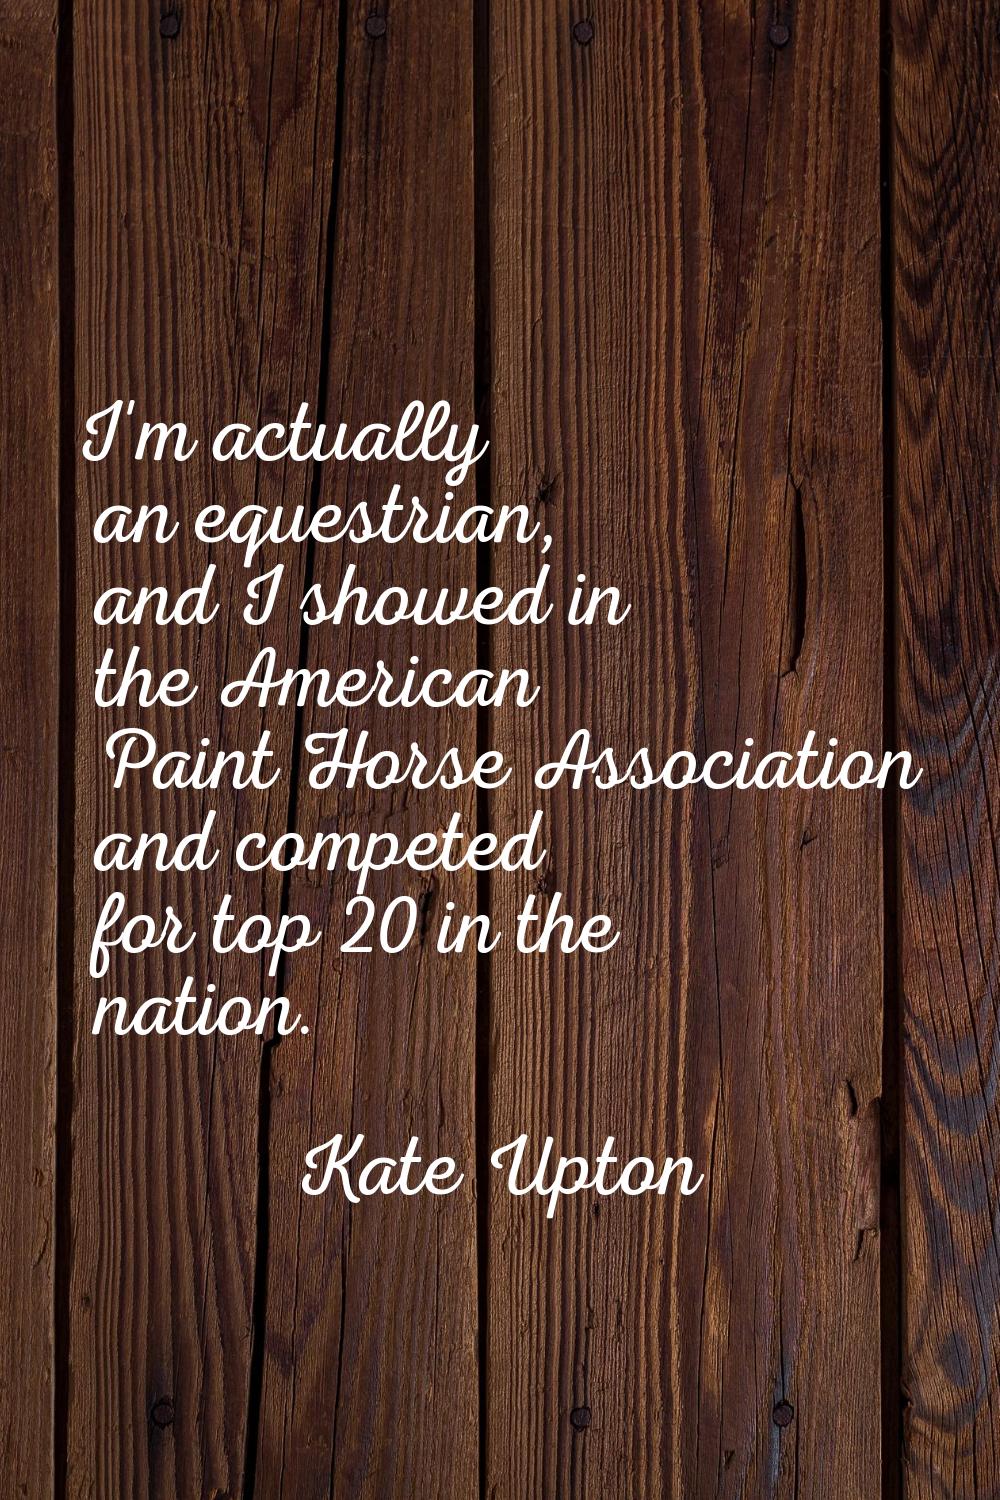 I'm actually an equestrian, and I showed in the American Paint Horse Association and competed for t